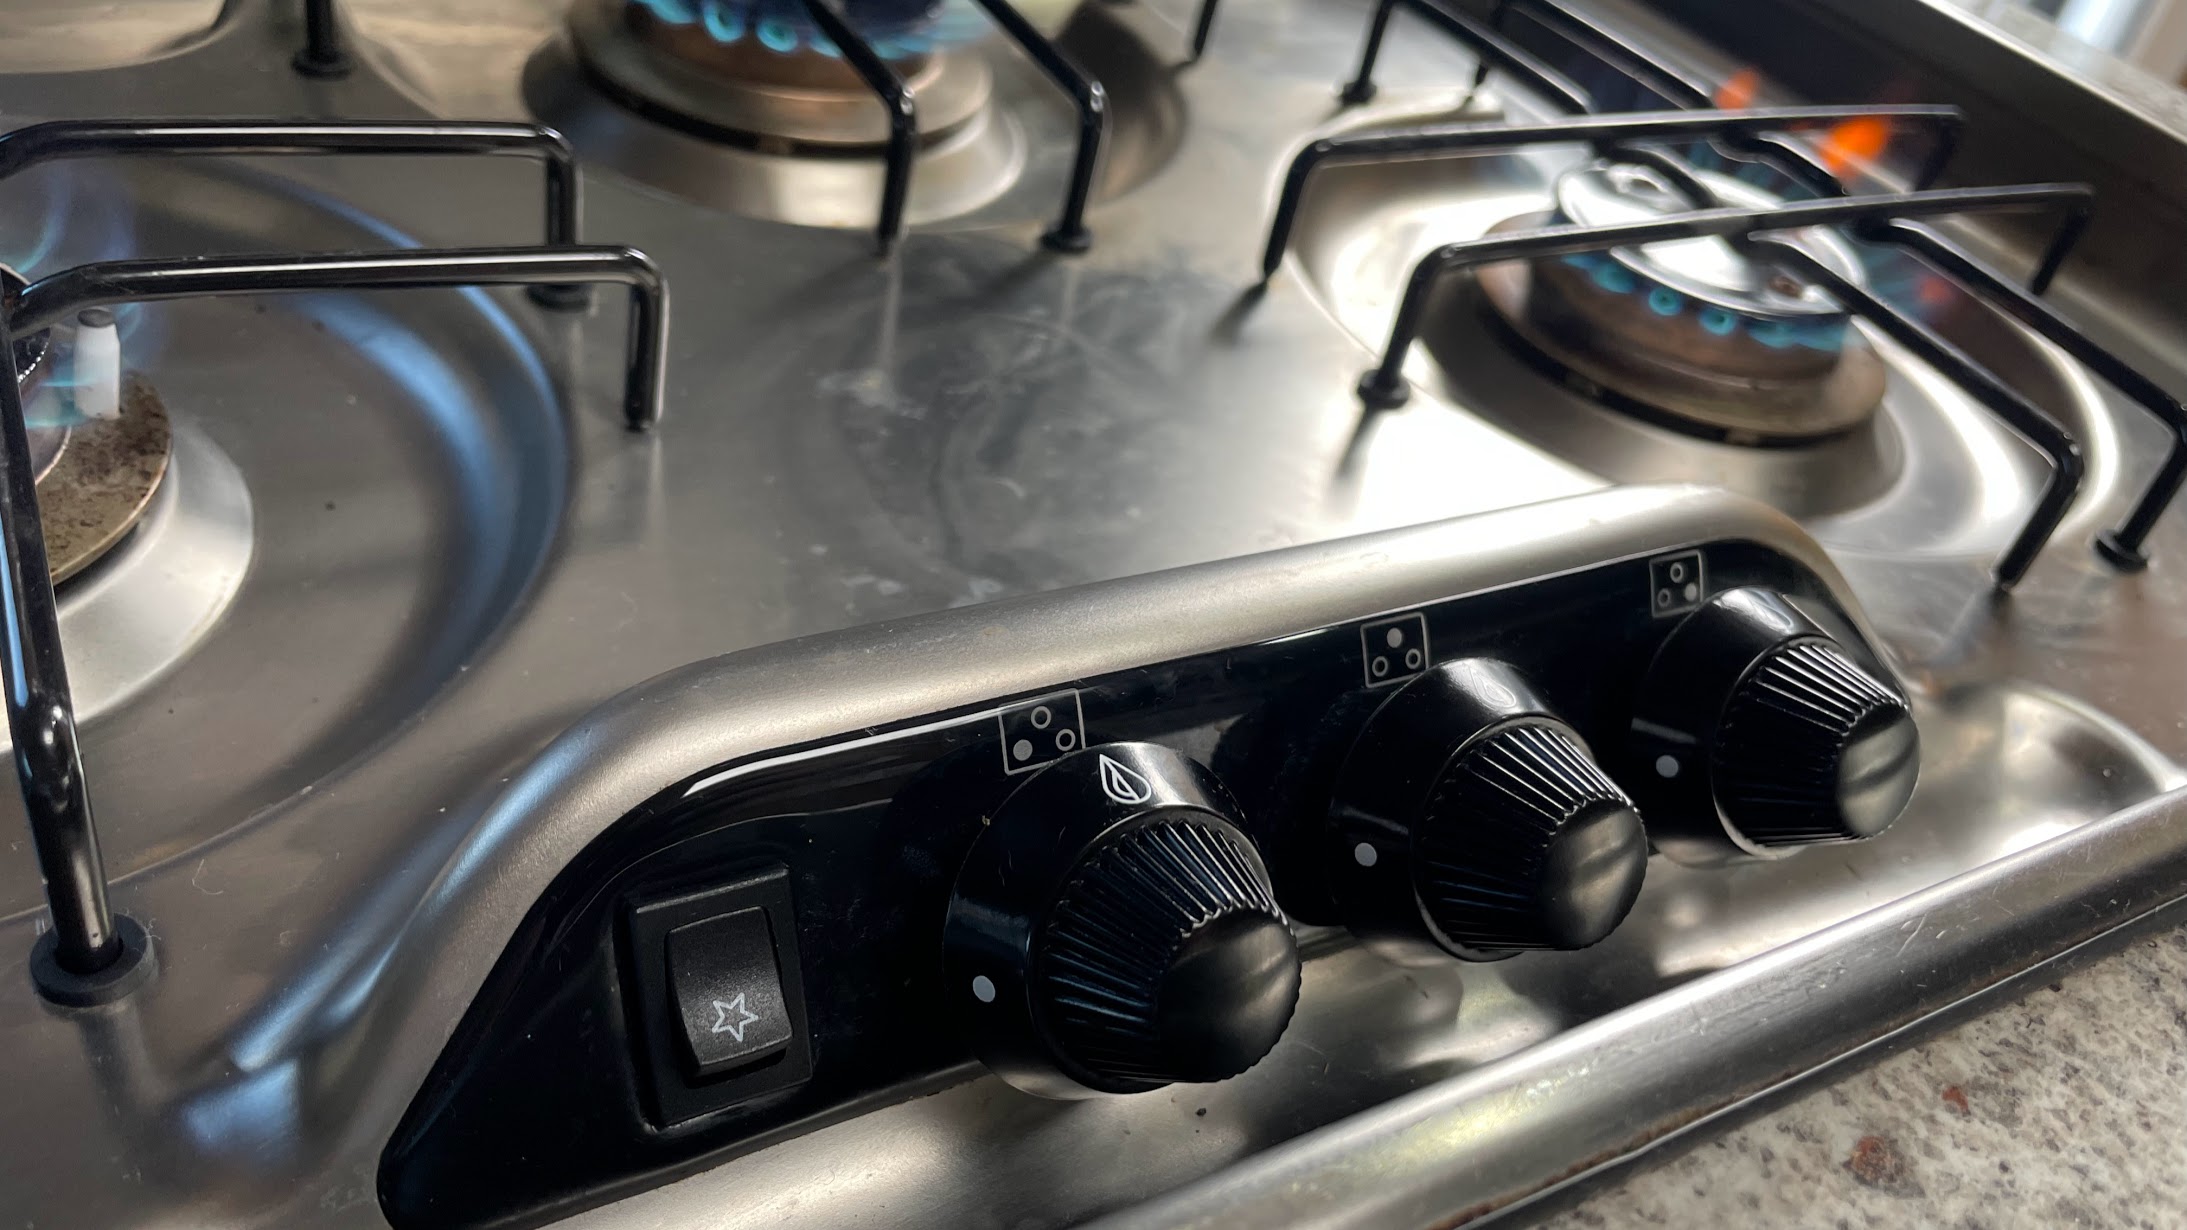 cooktop ignition